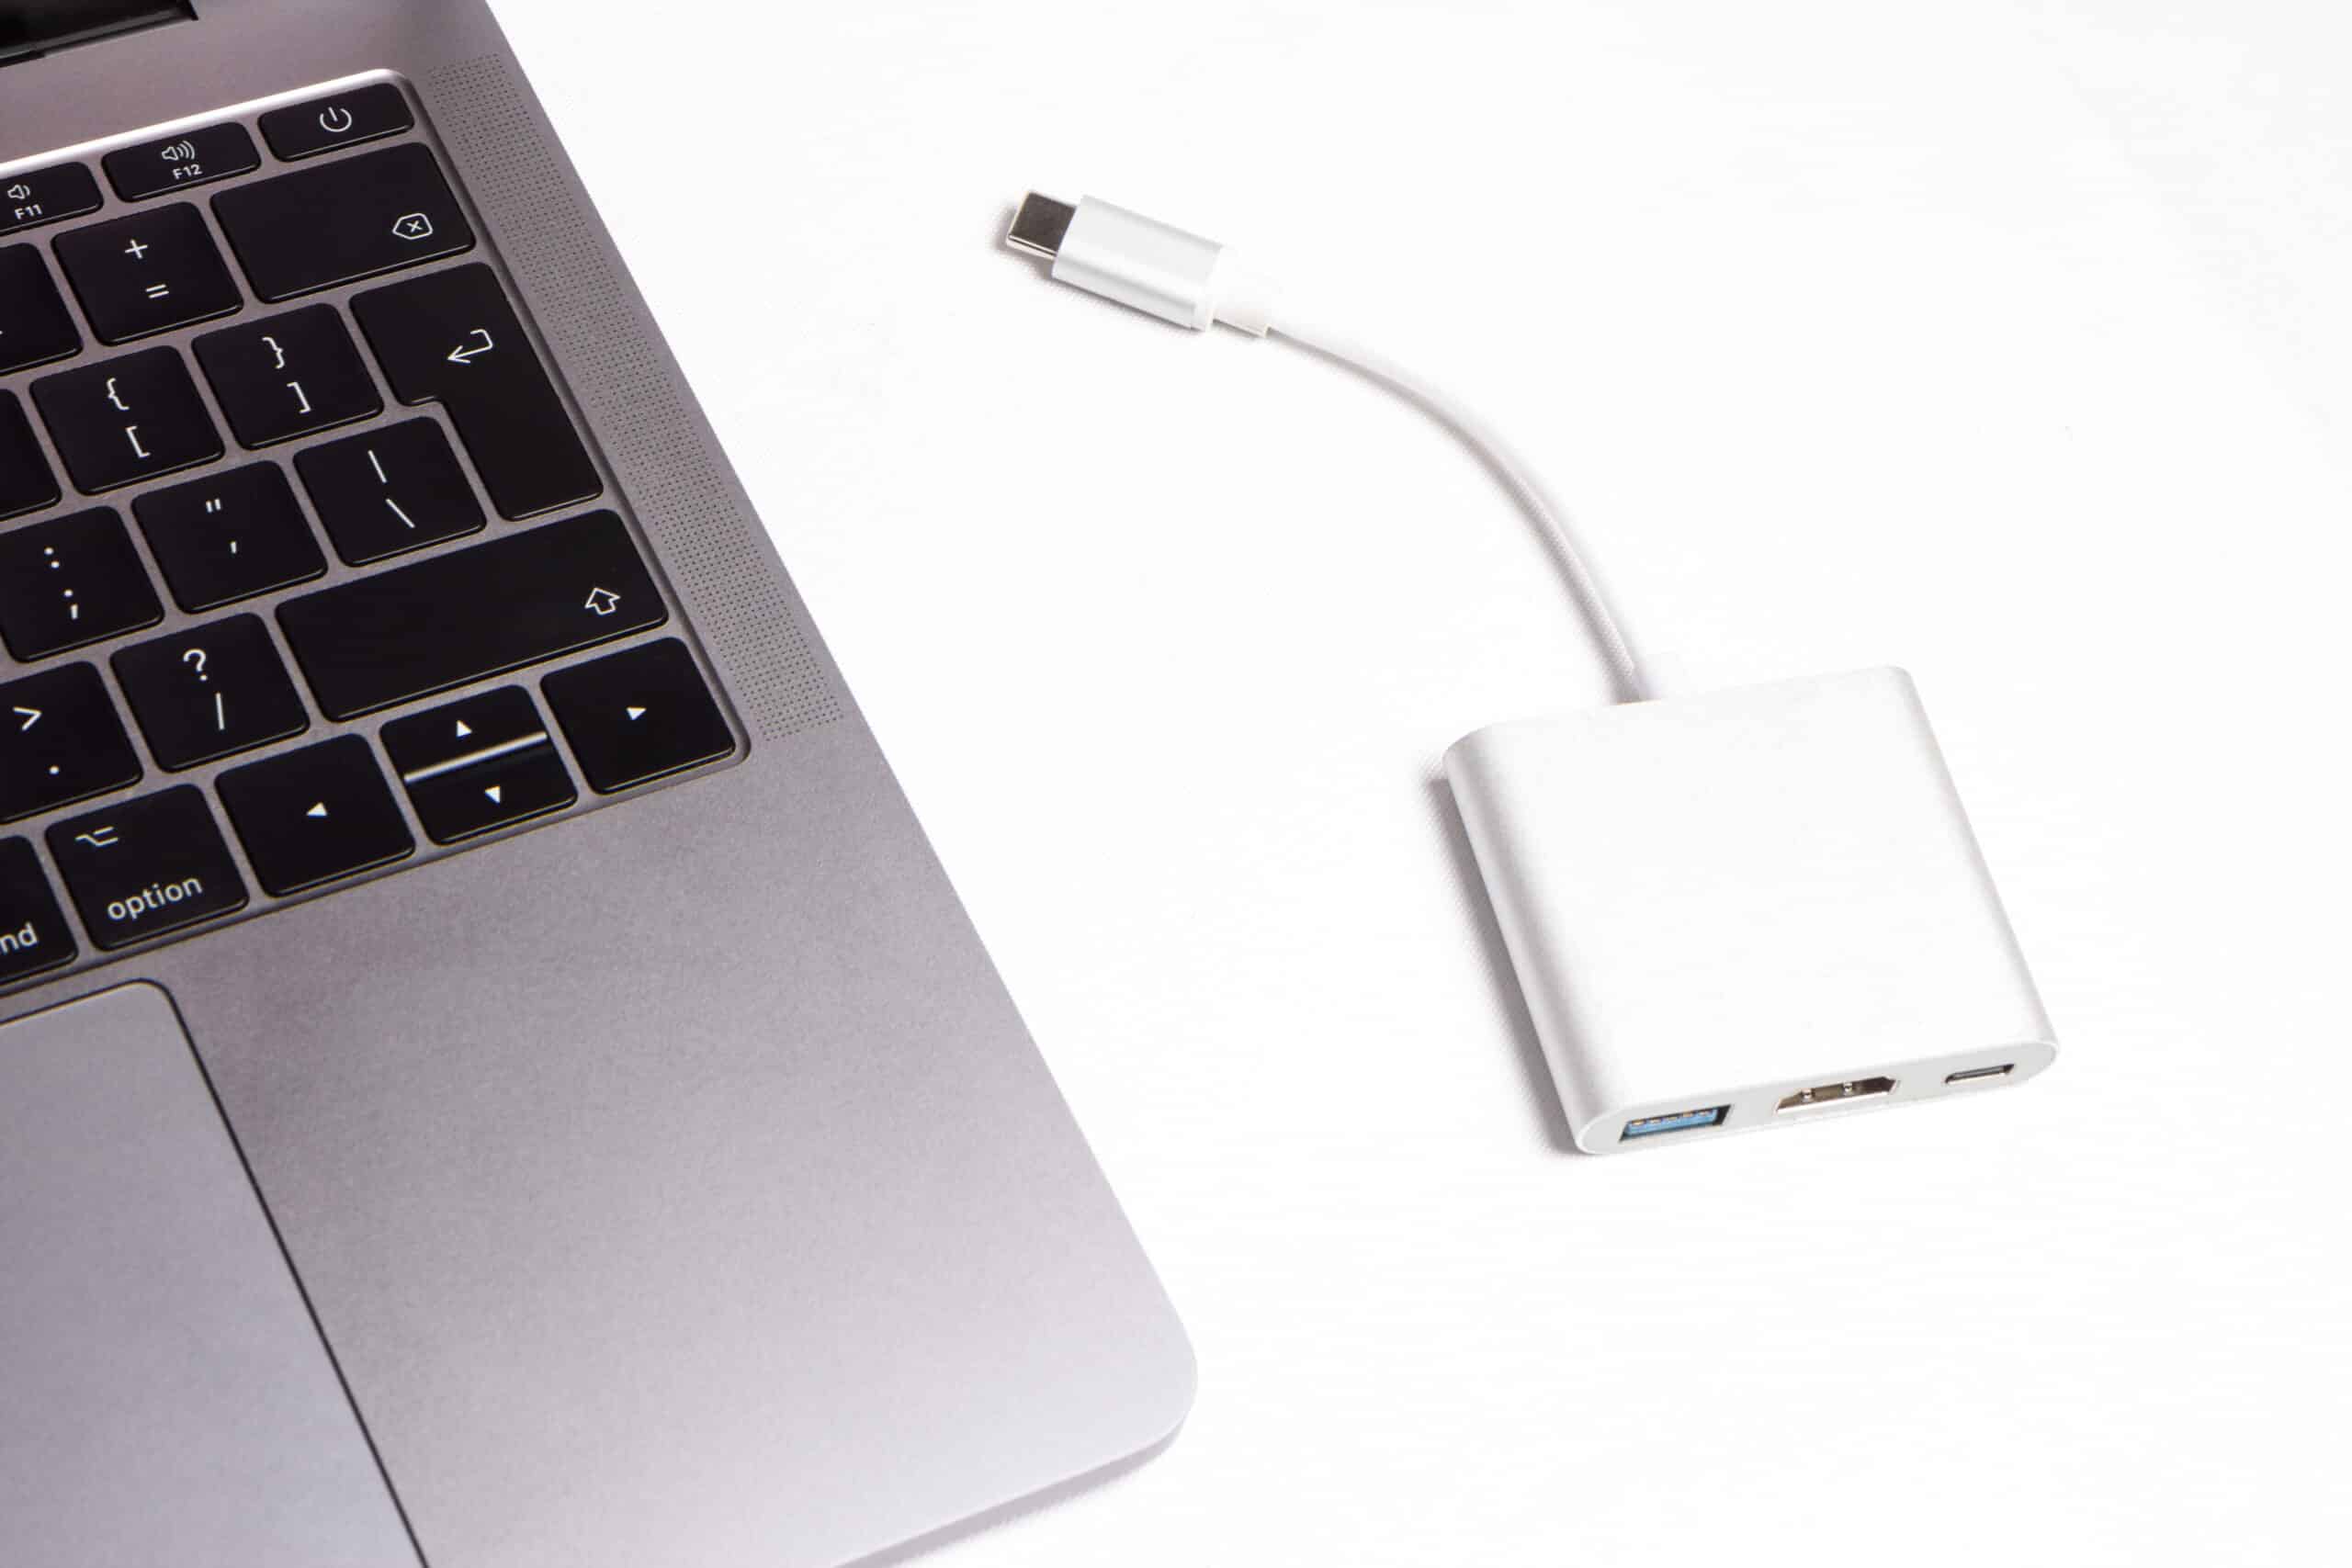 USB-C adapter next to a laptop